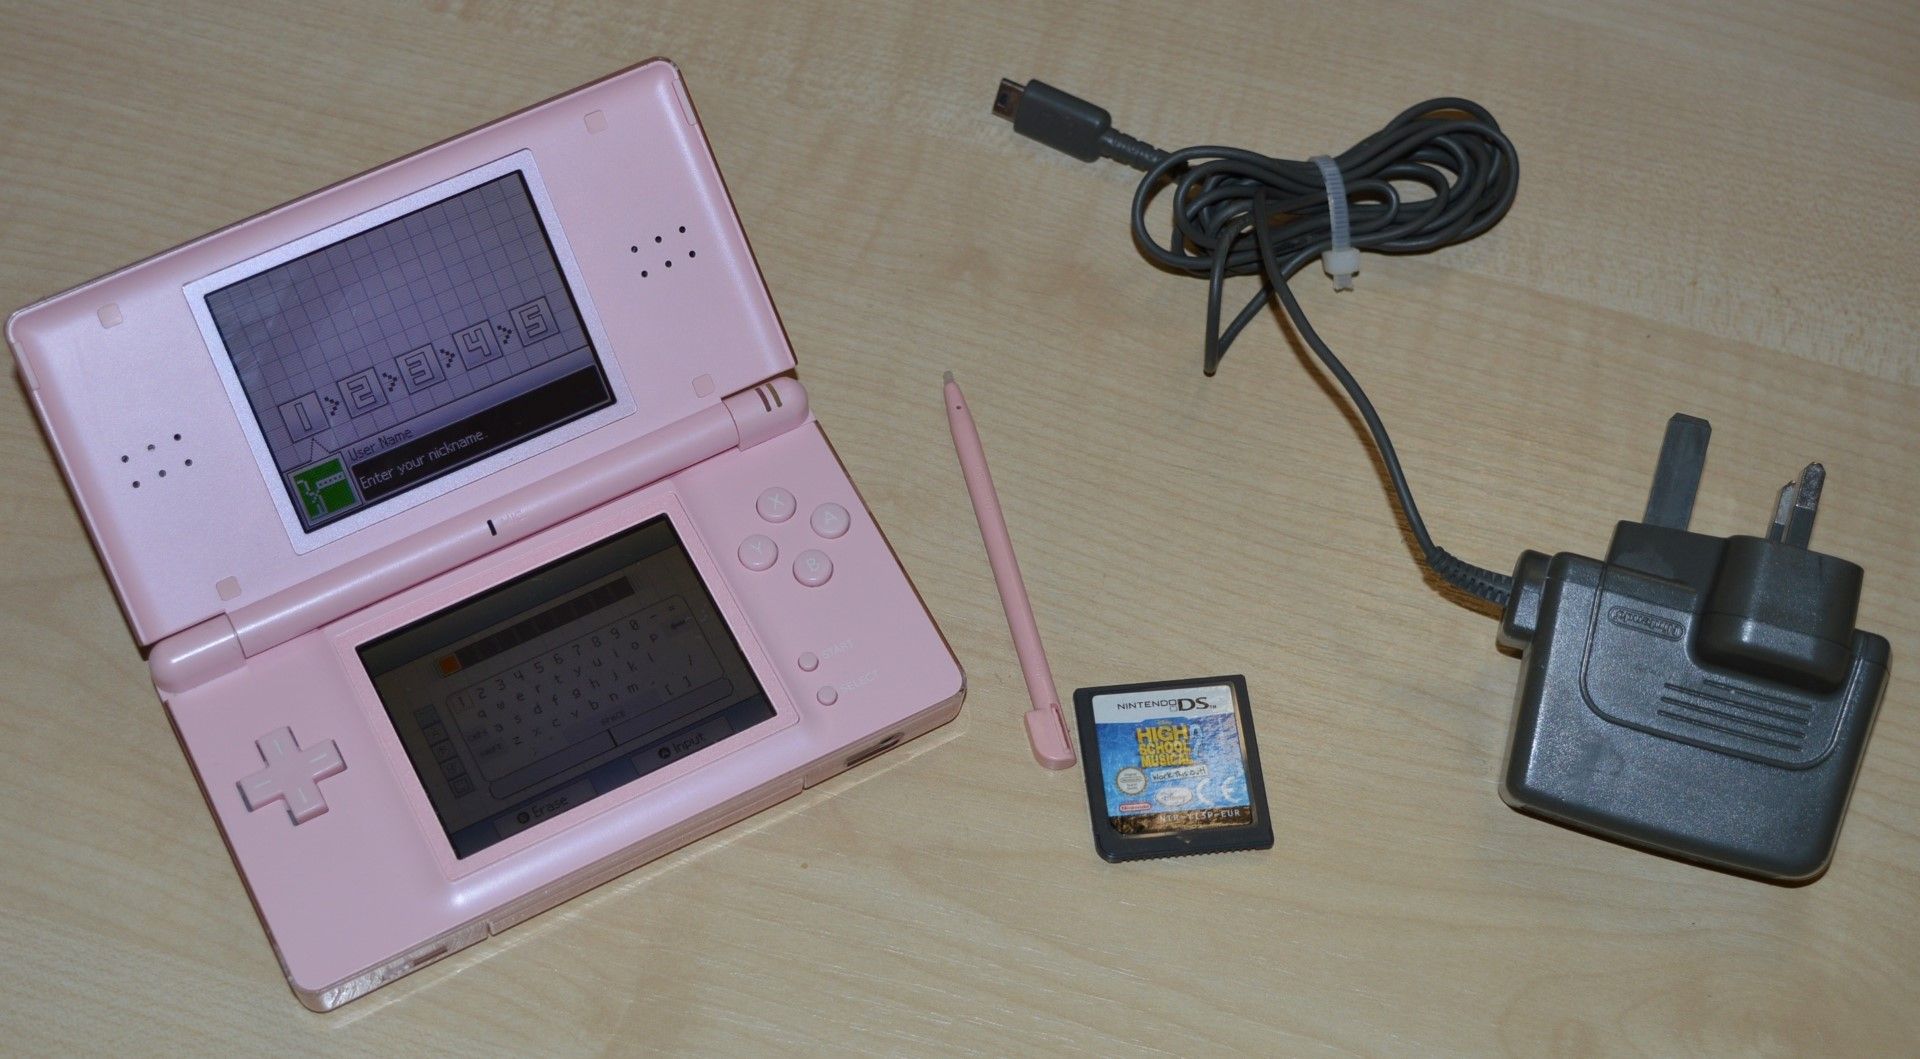 1 x Pink Nintendo DS Lite With High School Musical 2 Game - Includes Touch Pen and Charger - Good - Image 2 of 8